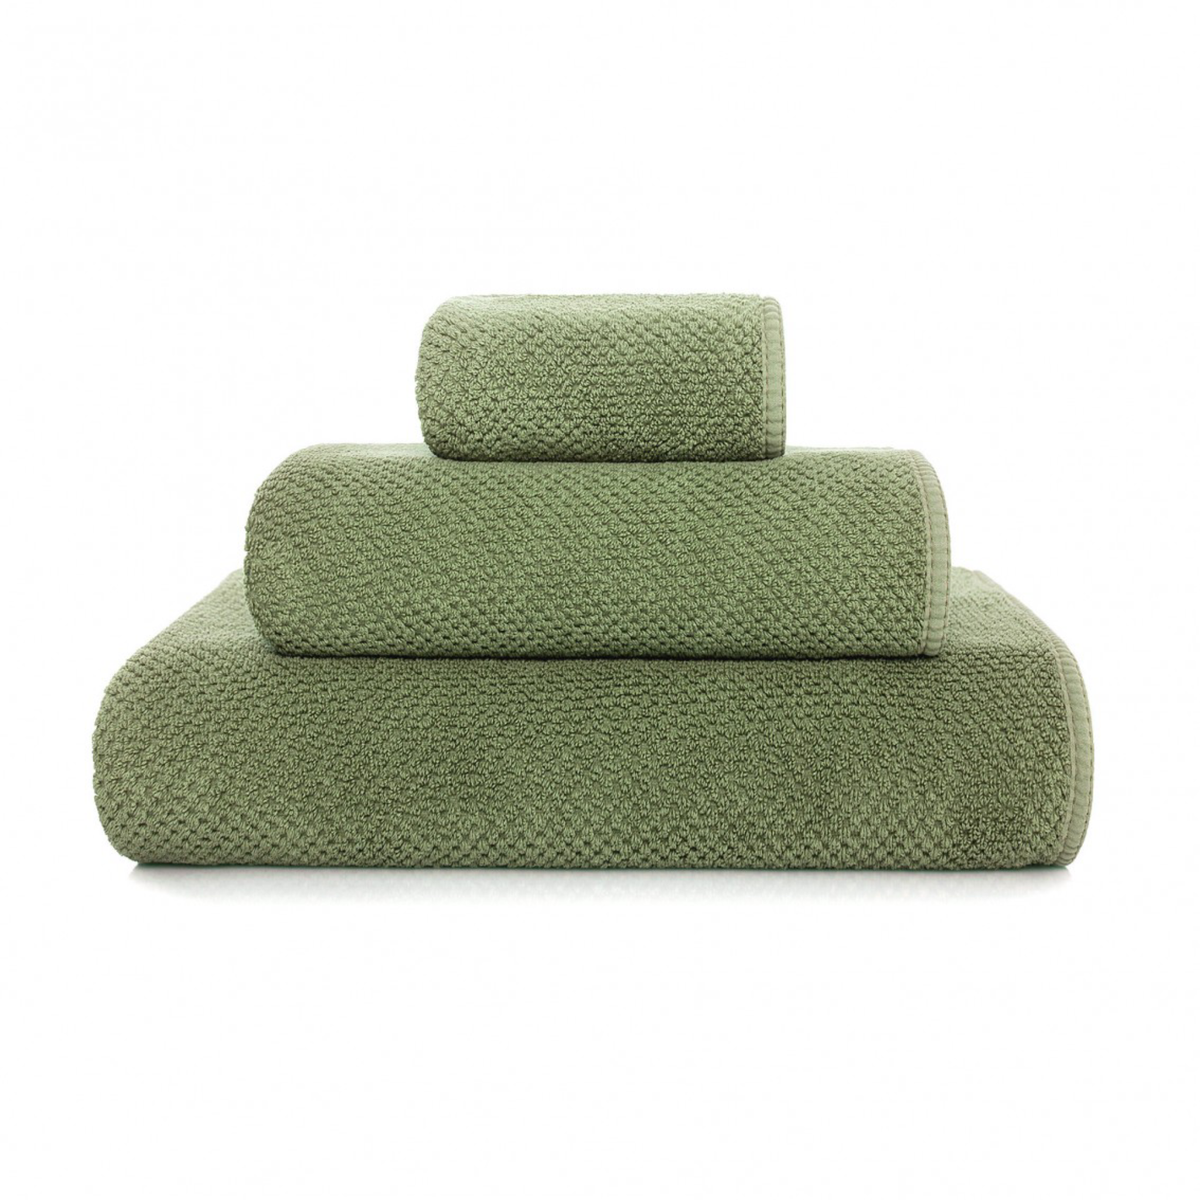 Stack of Graccioza Bee Waffle Towels in Jade Color and Different Sizes